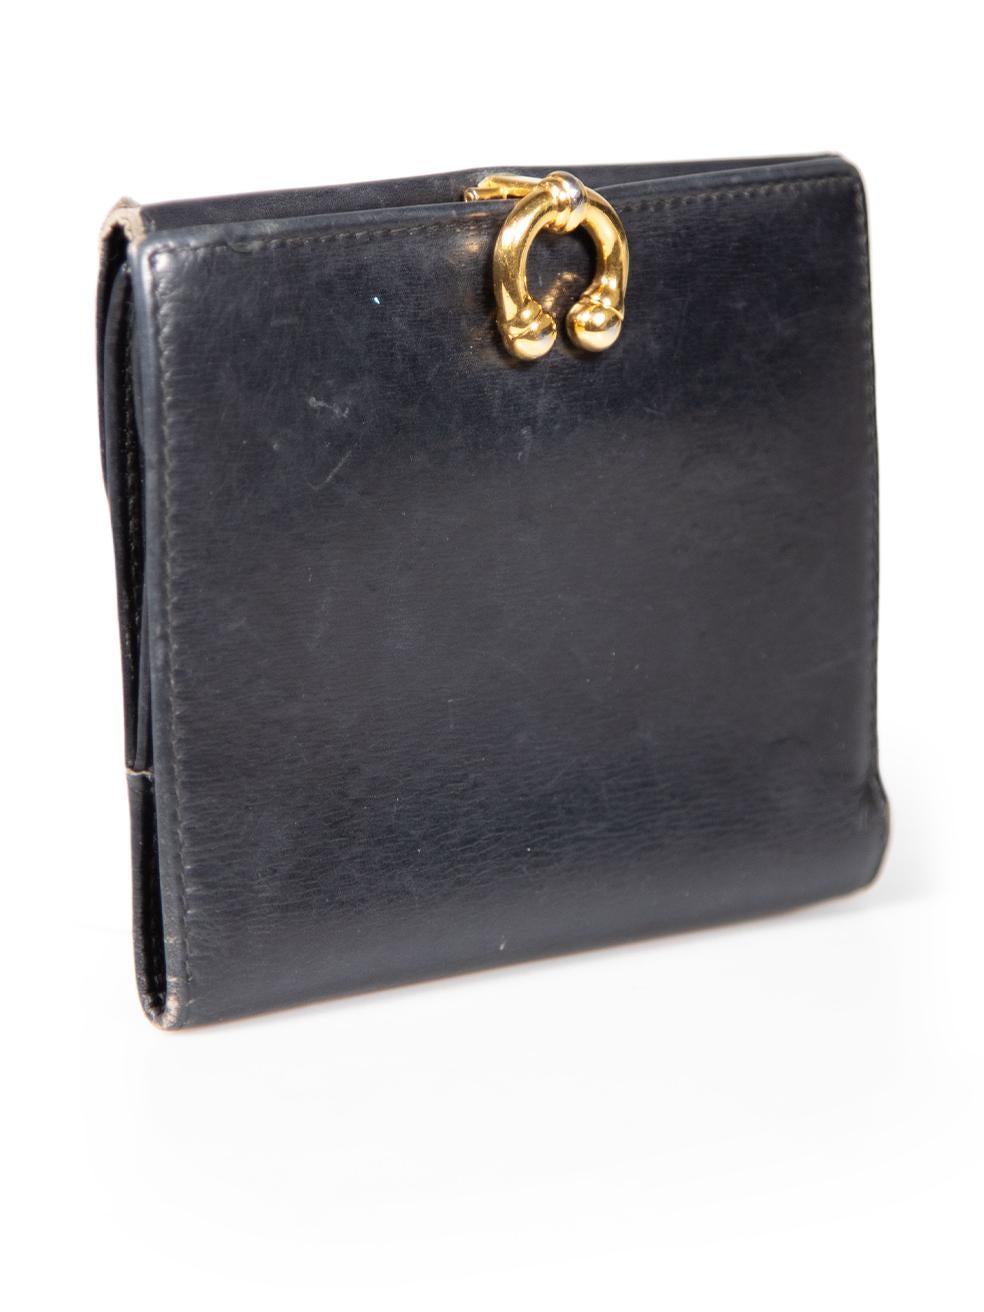 CONDITION is Good. General wear to wallet is evident. Moderate signs of wear to front, back, sides, internal lining with abrasions and marks on this used Gucci designer resale item.
 
 
 
 Details
 
 
 Black
 
 Leather
 
 Wallet
 
 Buckle detail
 
